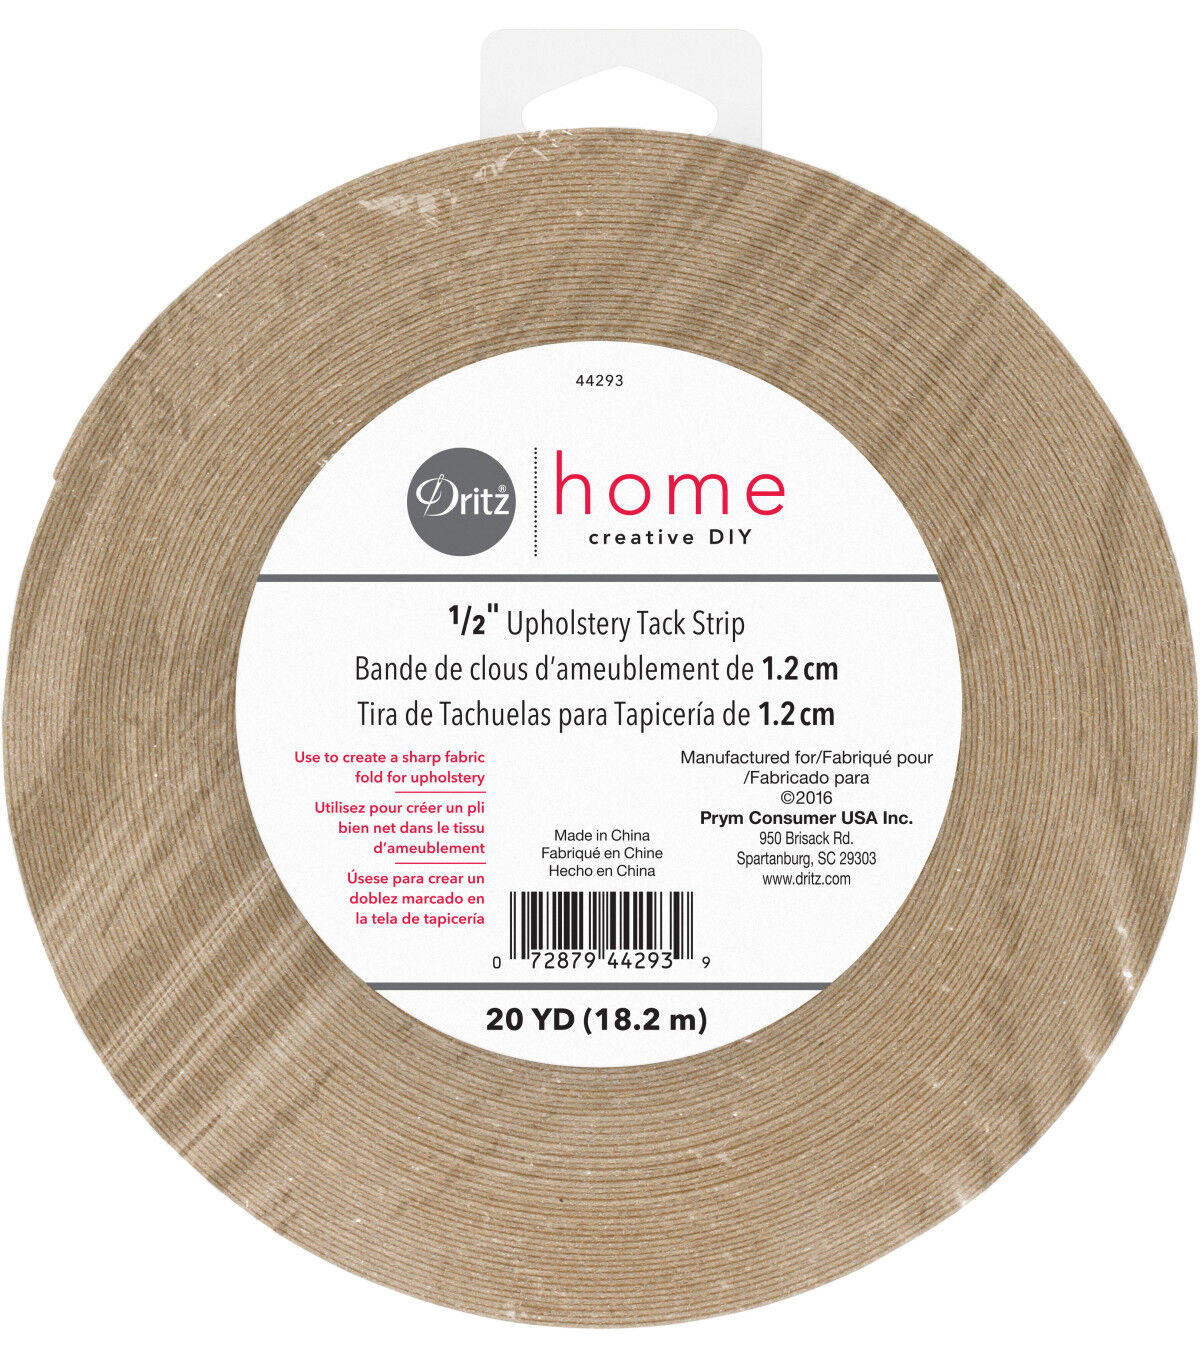 Dritz Home Upholstery Tack Roll, 1/2